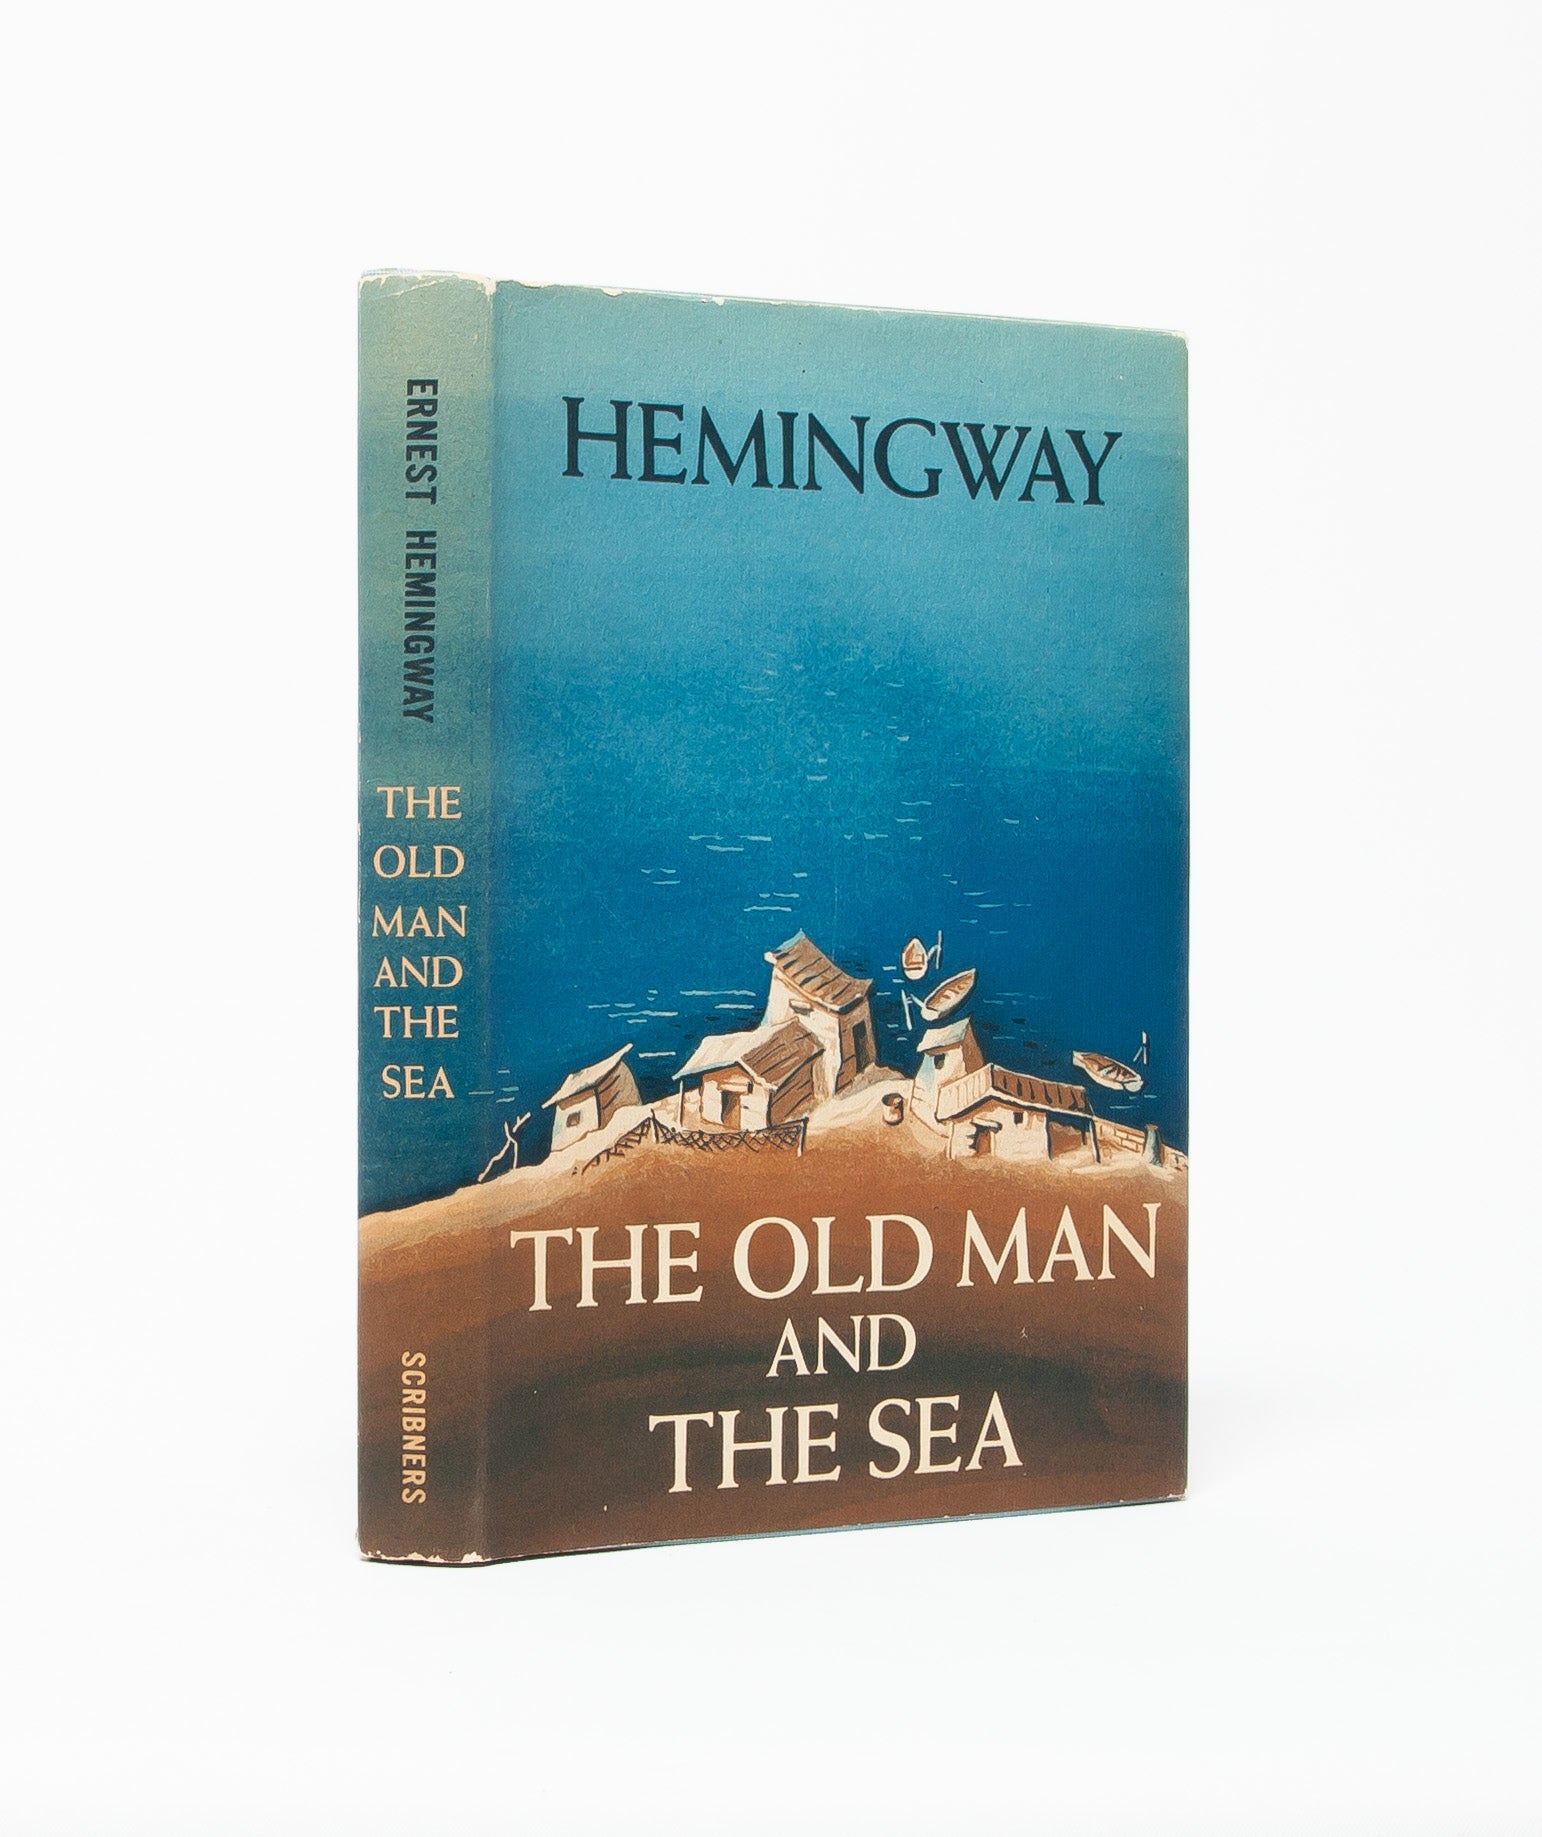 (Item #5381) The Old Man and the Sea. Ernest Hemingway.